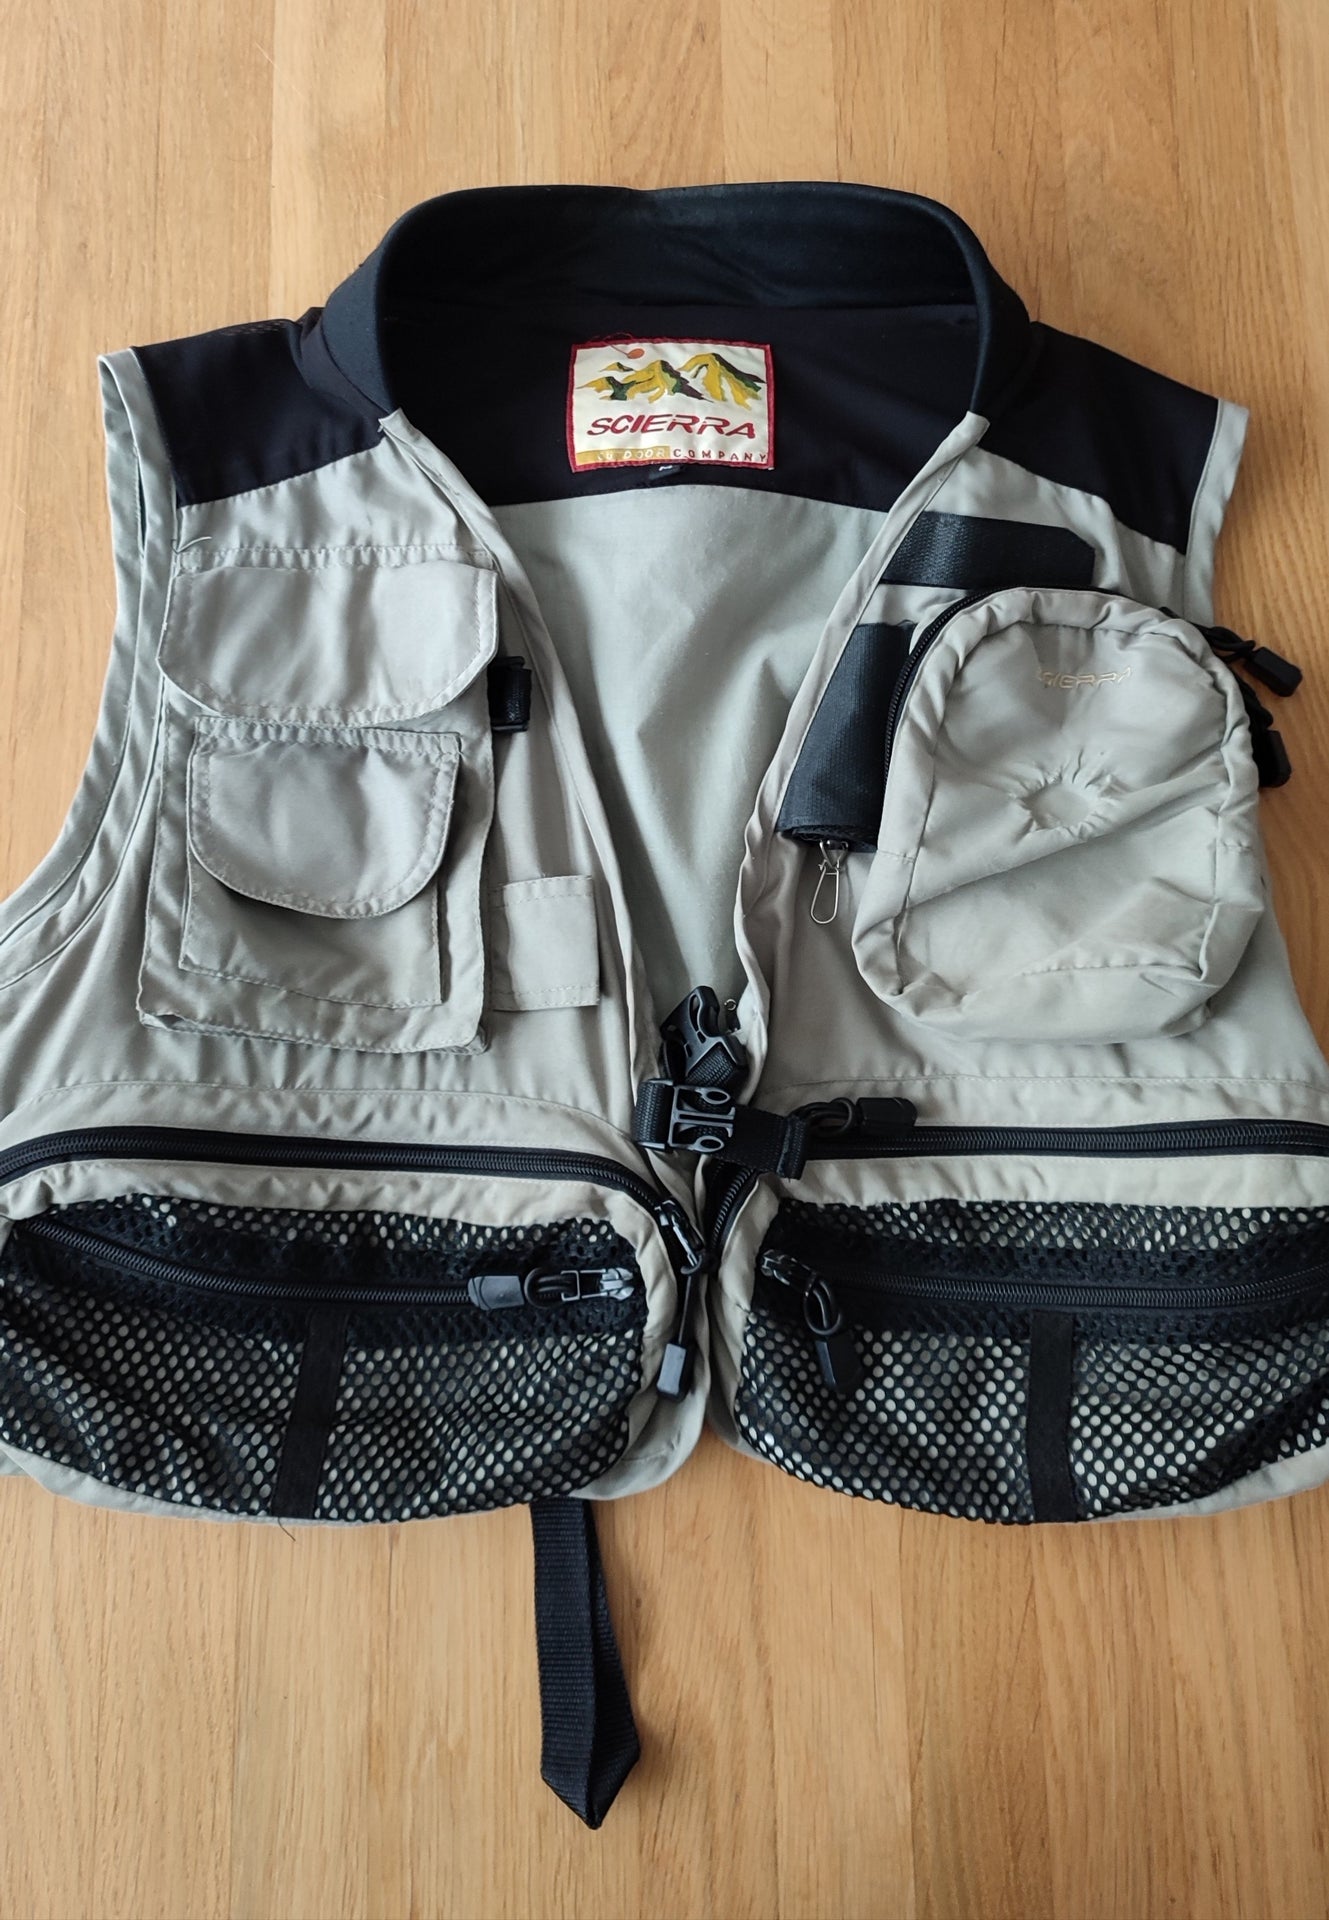 Gone to a new home - Scierra vest